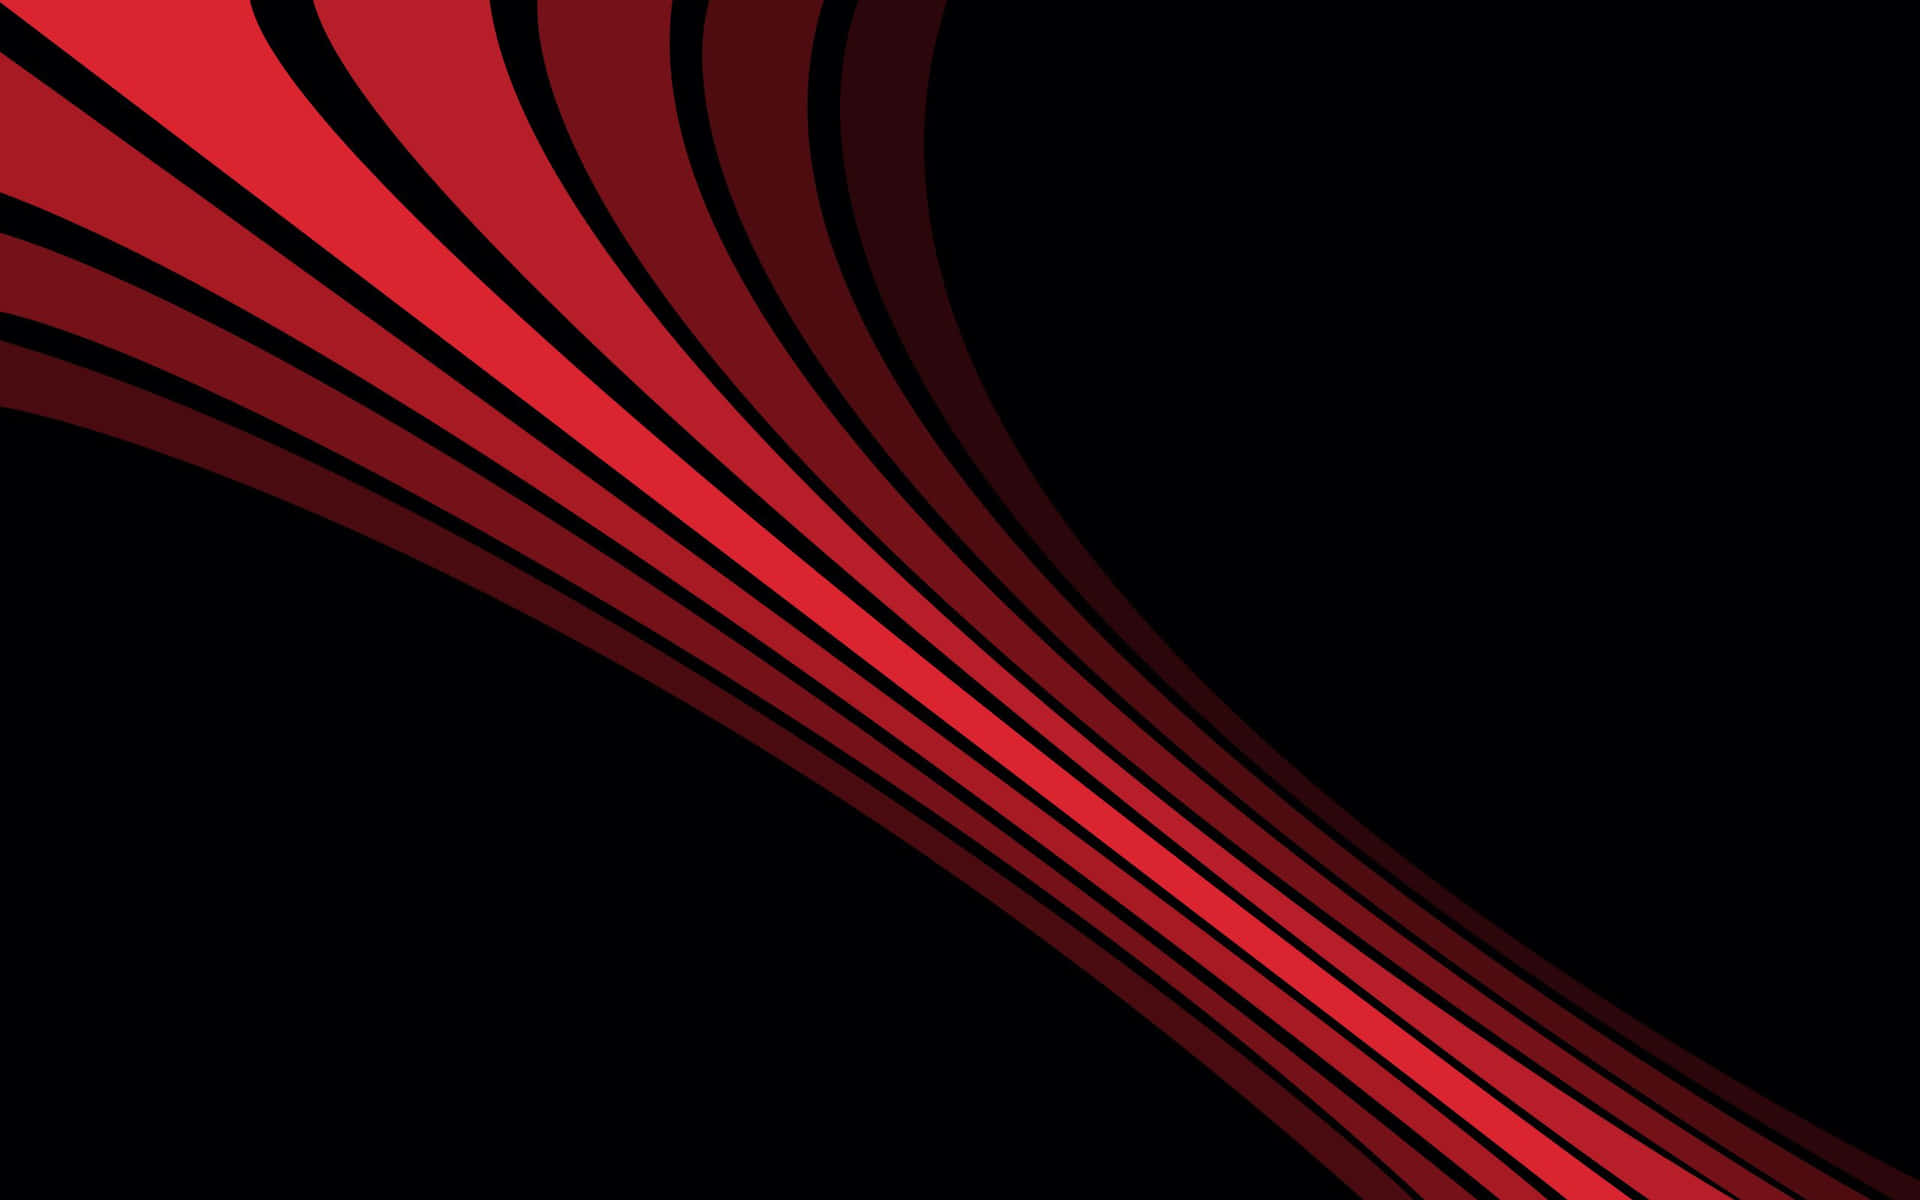 Curvy Red And Black Background Stripes